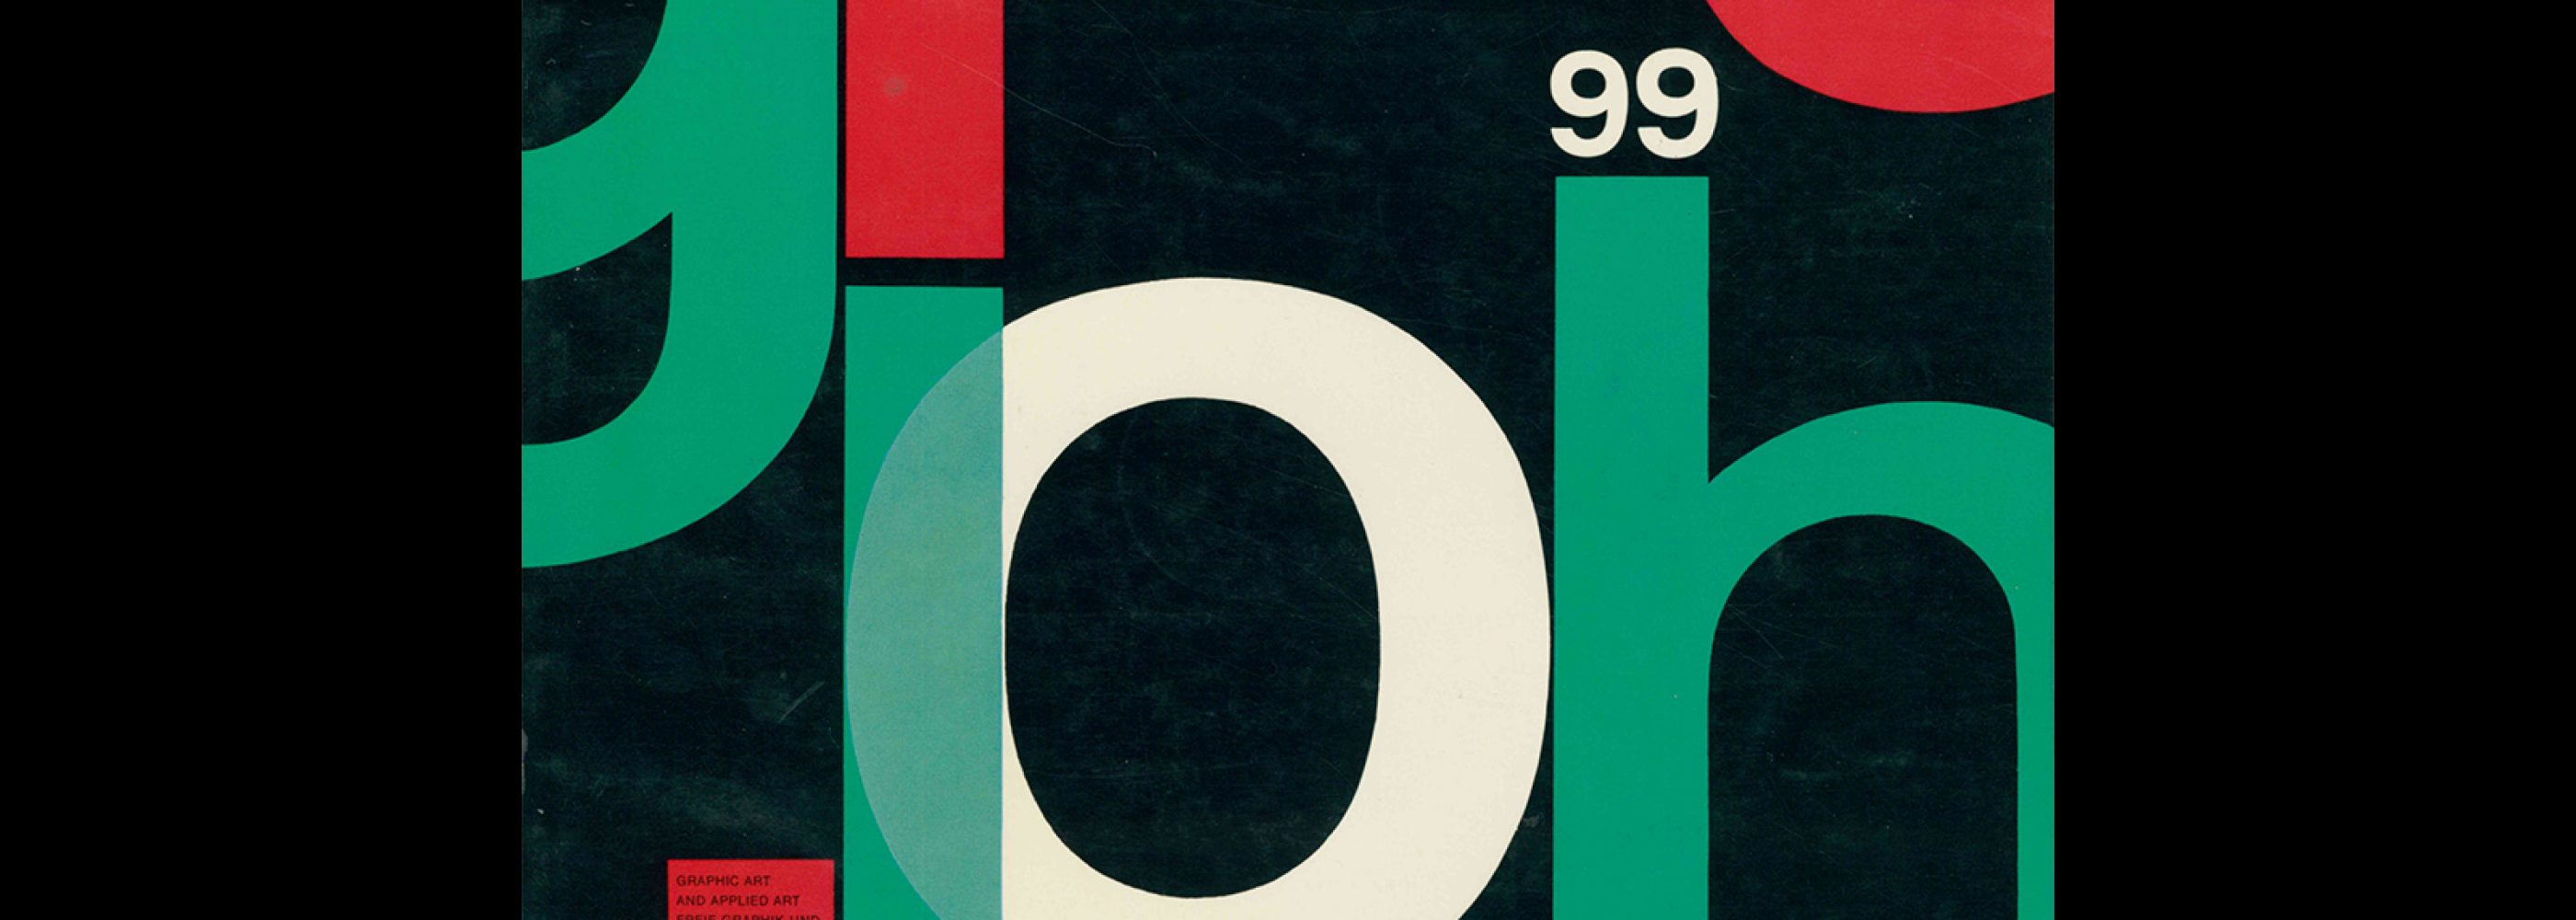 Graphis 99, 1962. Cover design by Reid Miles